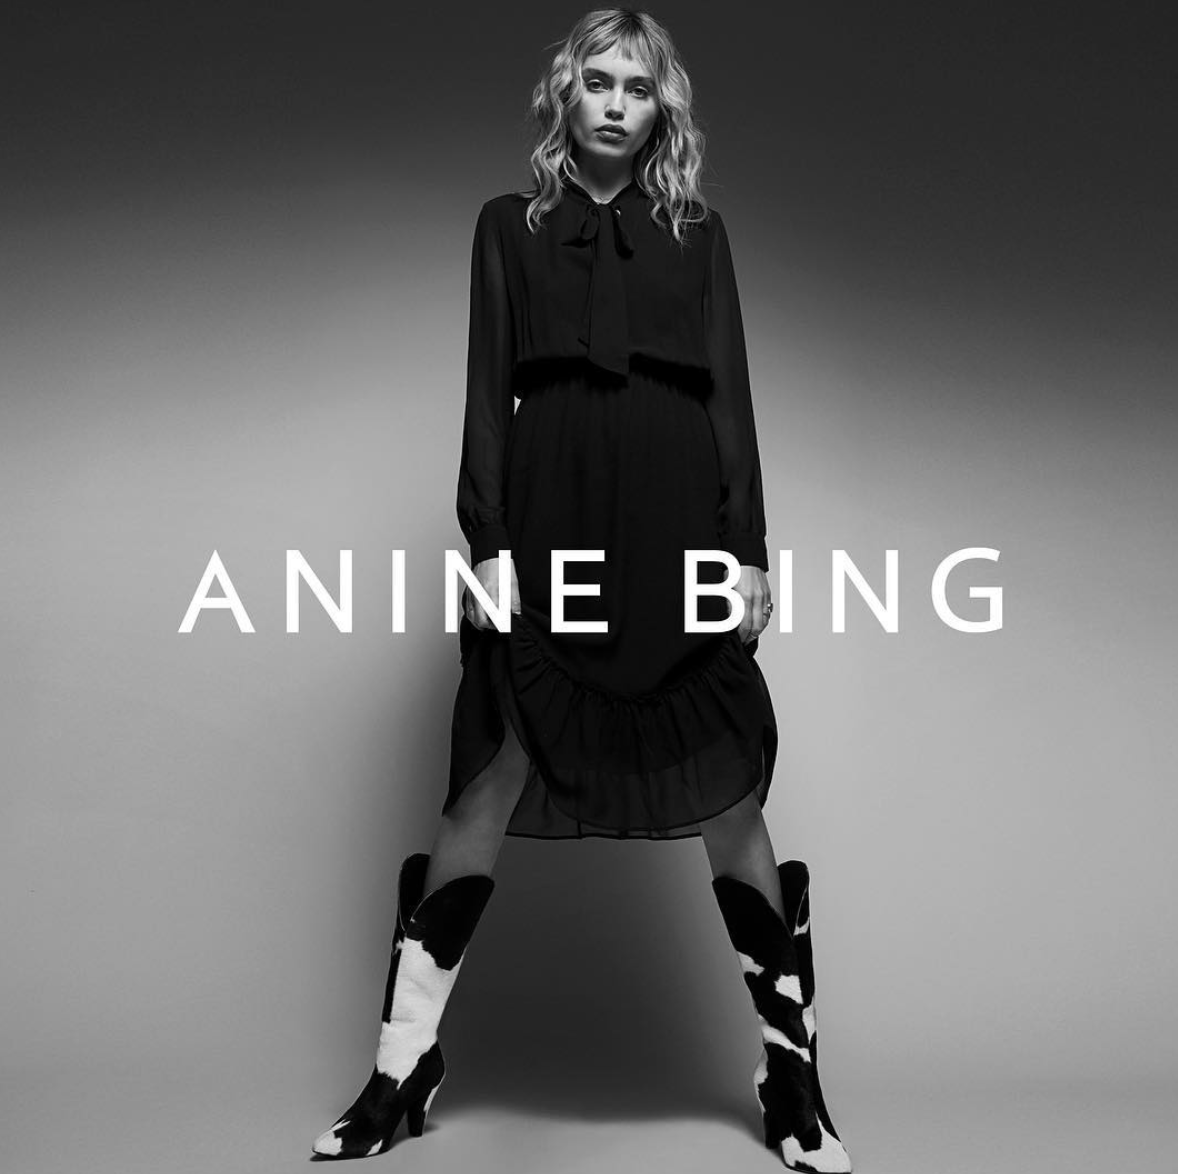 ANINE BING, the LA-based lifestyle and fashion brand, has joined